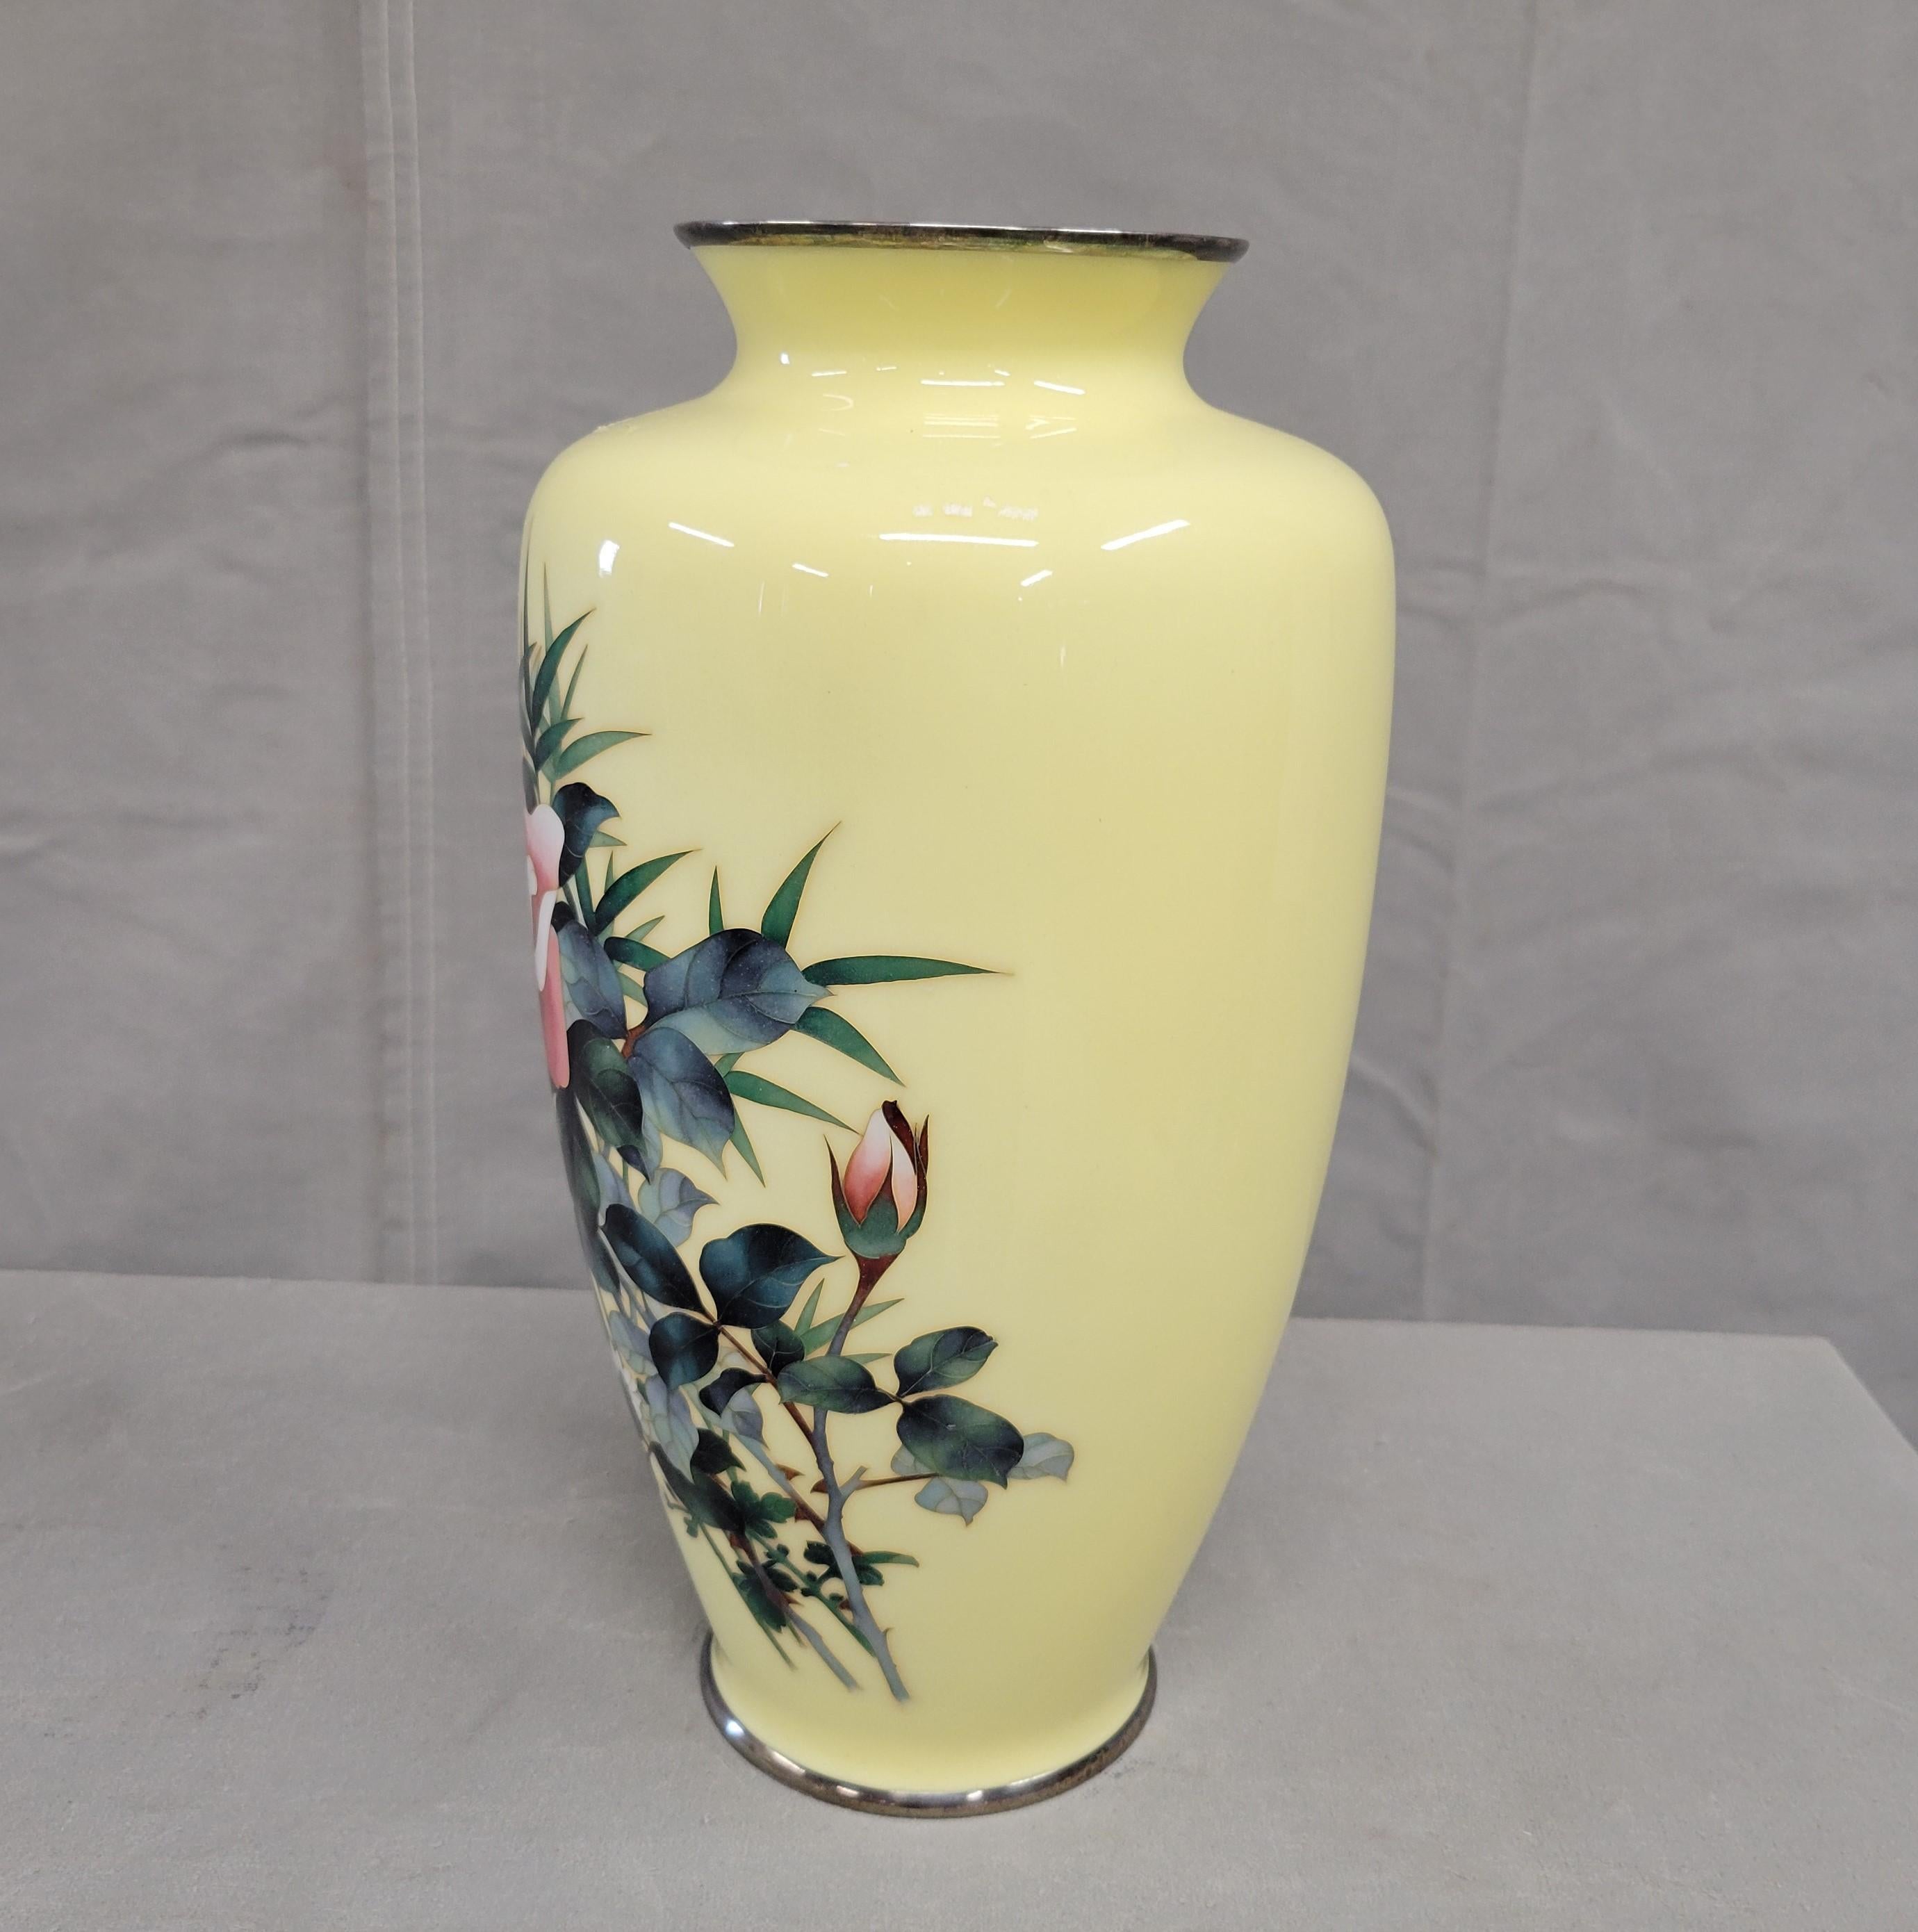 This large and rare antique vase was created by Japanese master artist Ando Jubei (1876-1956) during the Meiji period. The sterling silver body was covered with cloisonné enamel and decorated with roses in shades of butter yellow, forest green,